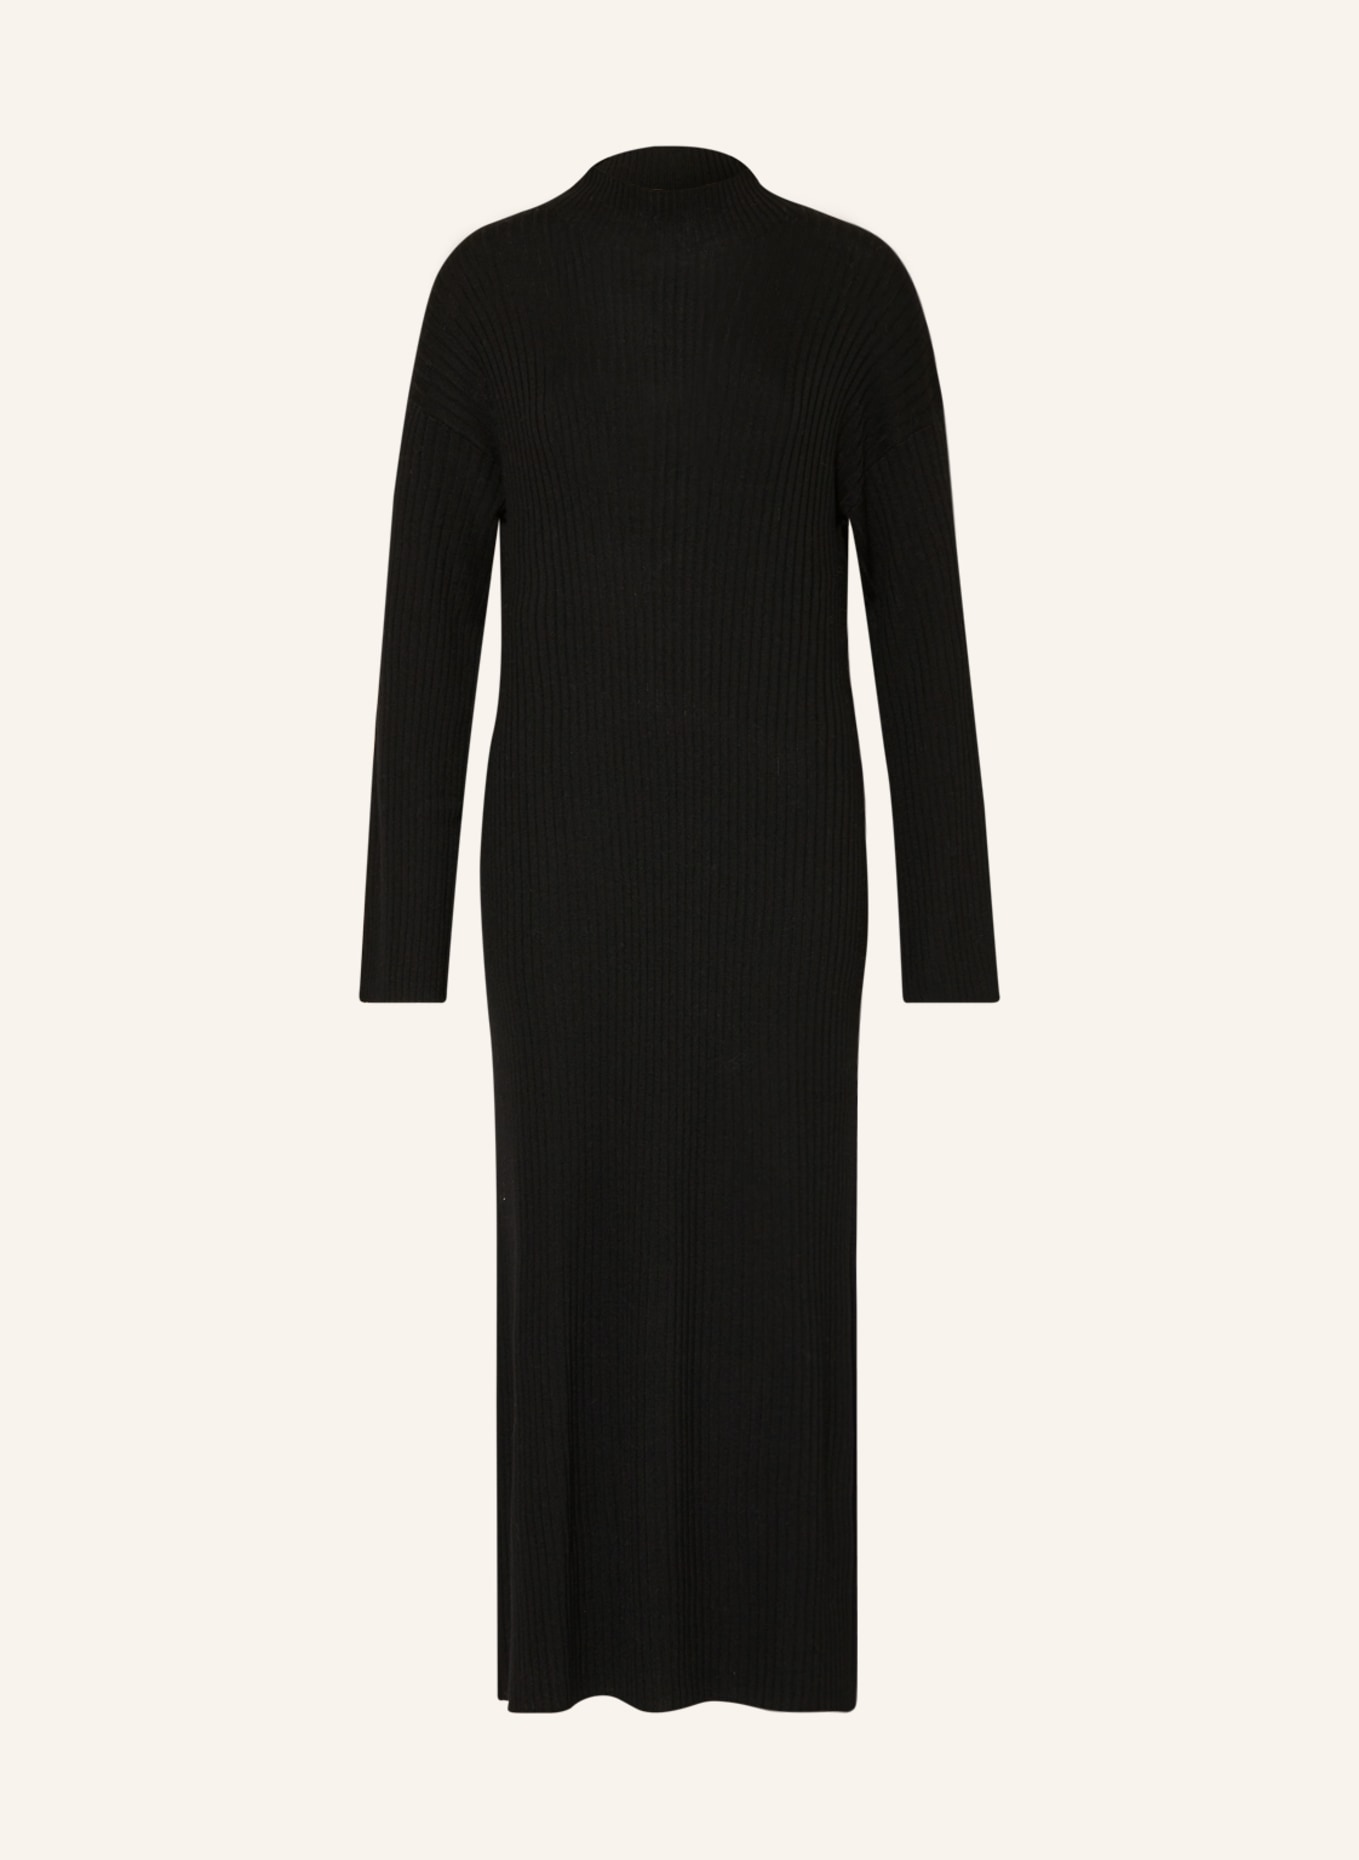 LOULOU STUDIO Knit dress ALTRA made of merino wool with cashmere, Color: BLACK (Image 1)